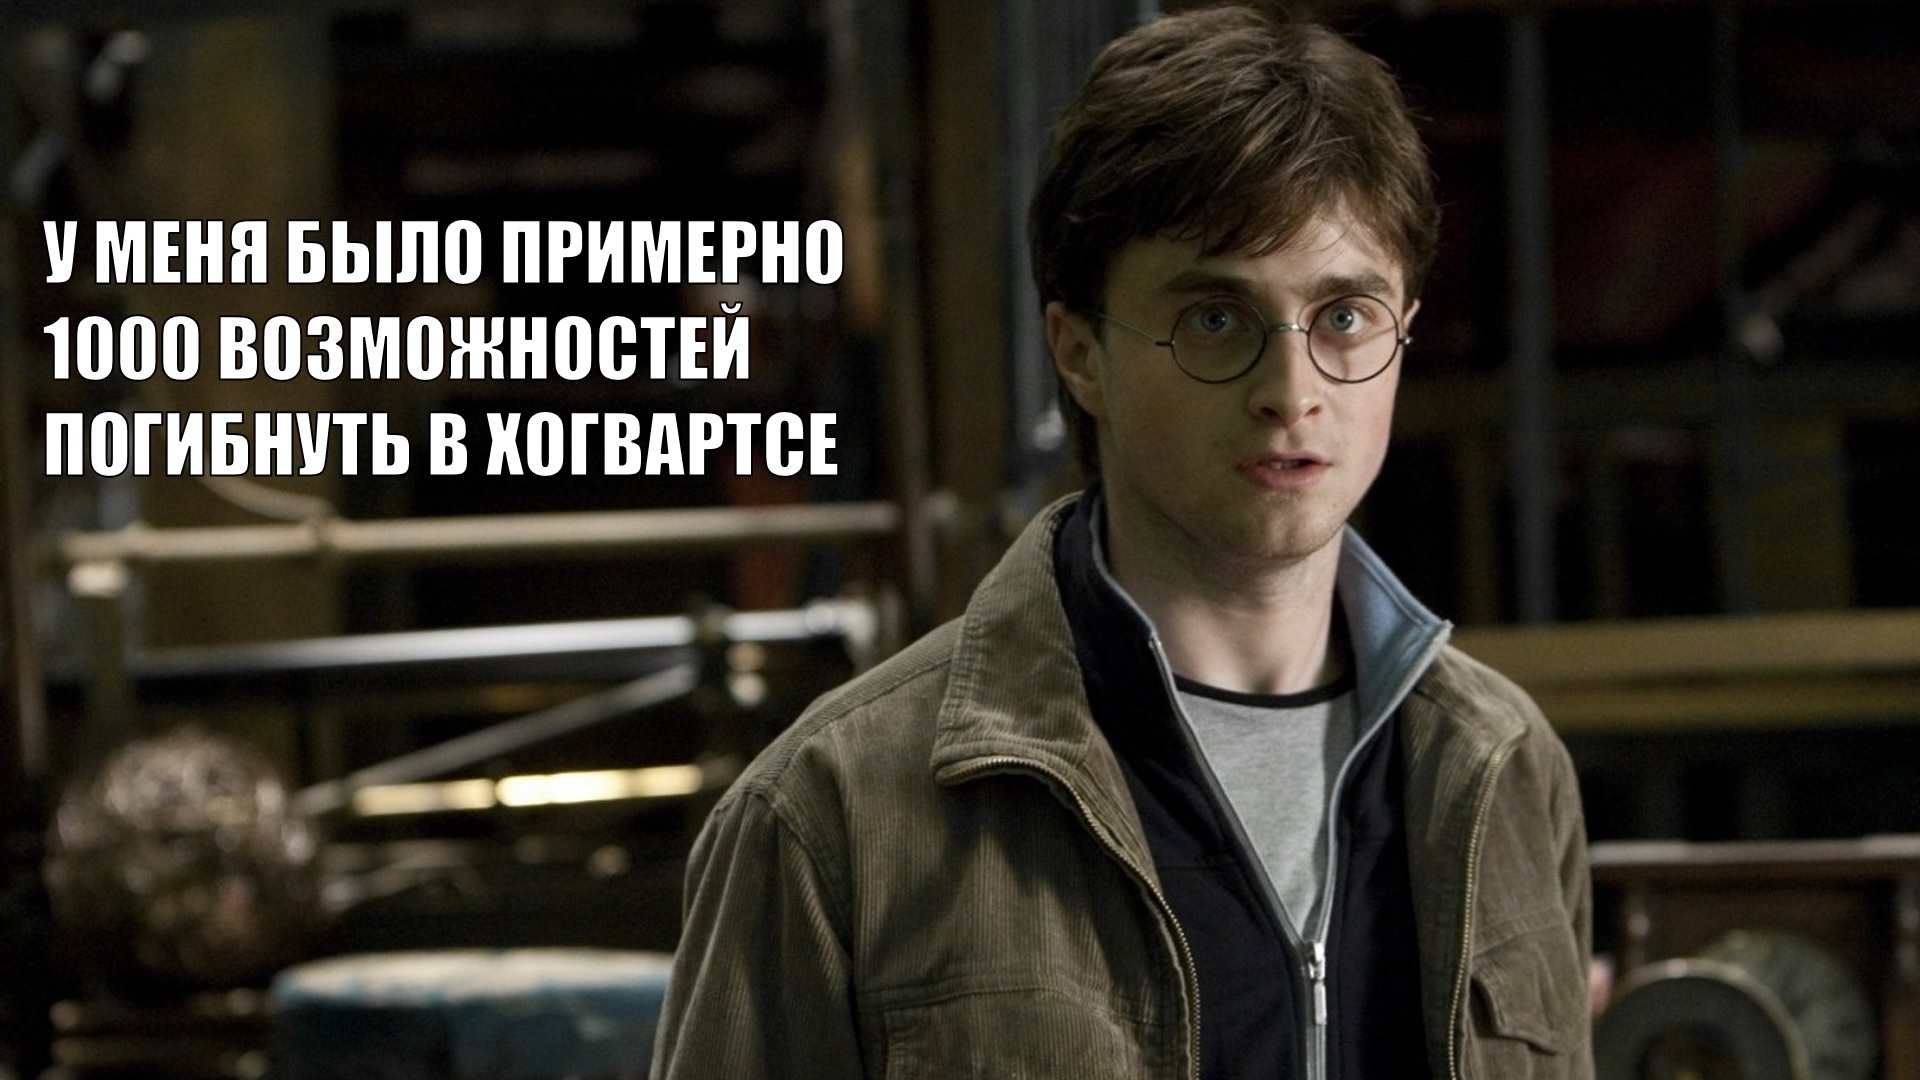 And the movie parents of the century become... - Harry Potter, Movies, Hogwarts, Parents and children, Longpost